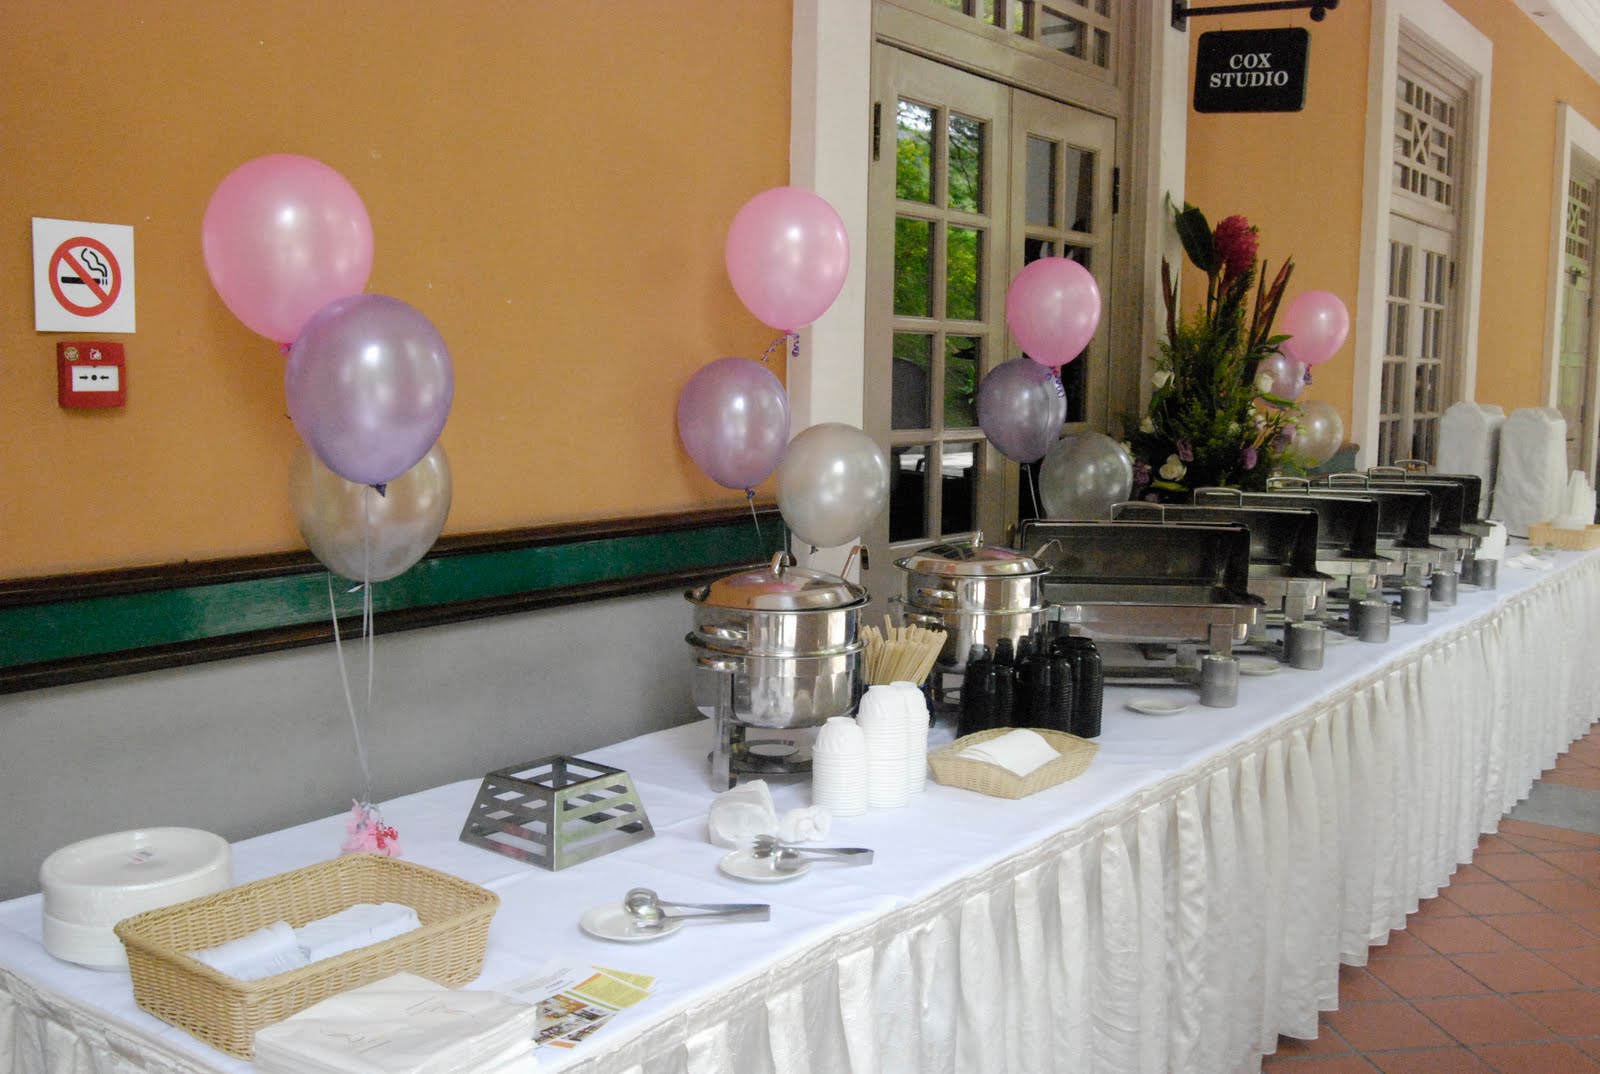 Balloons on food station or buffet adds a creative perspective to the entire wedding theme.